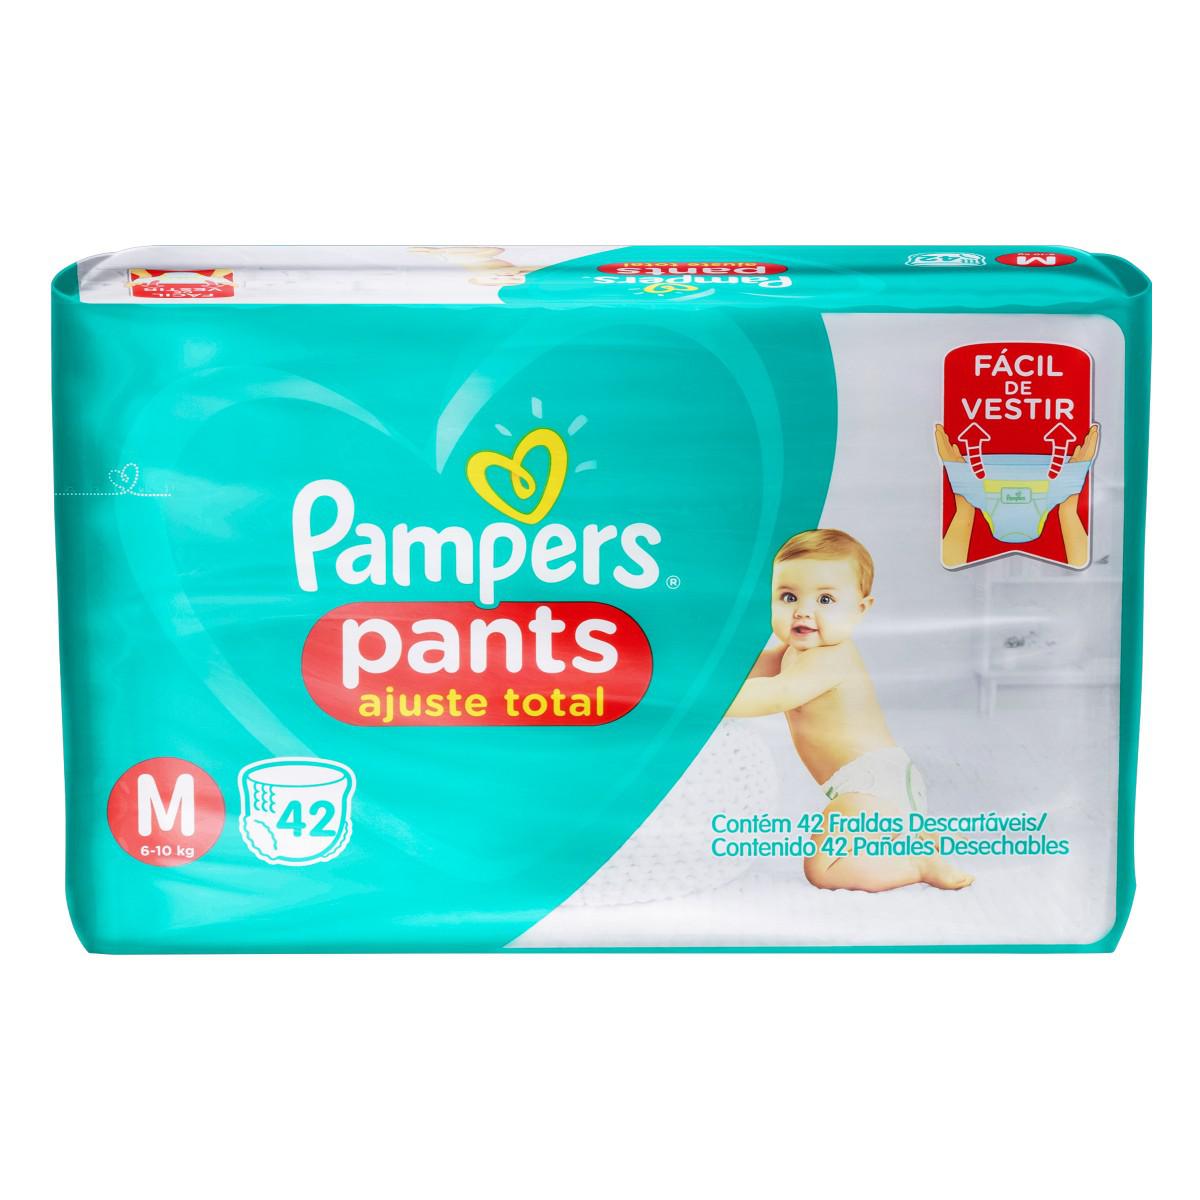 cena pampers 3 29 couches